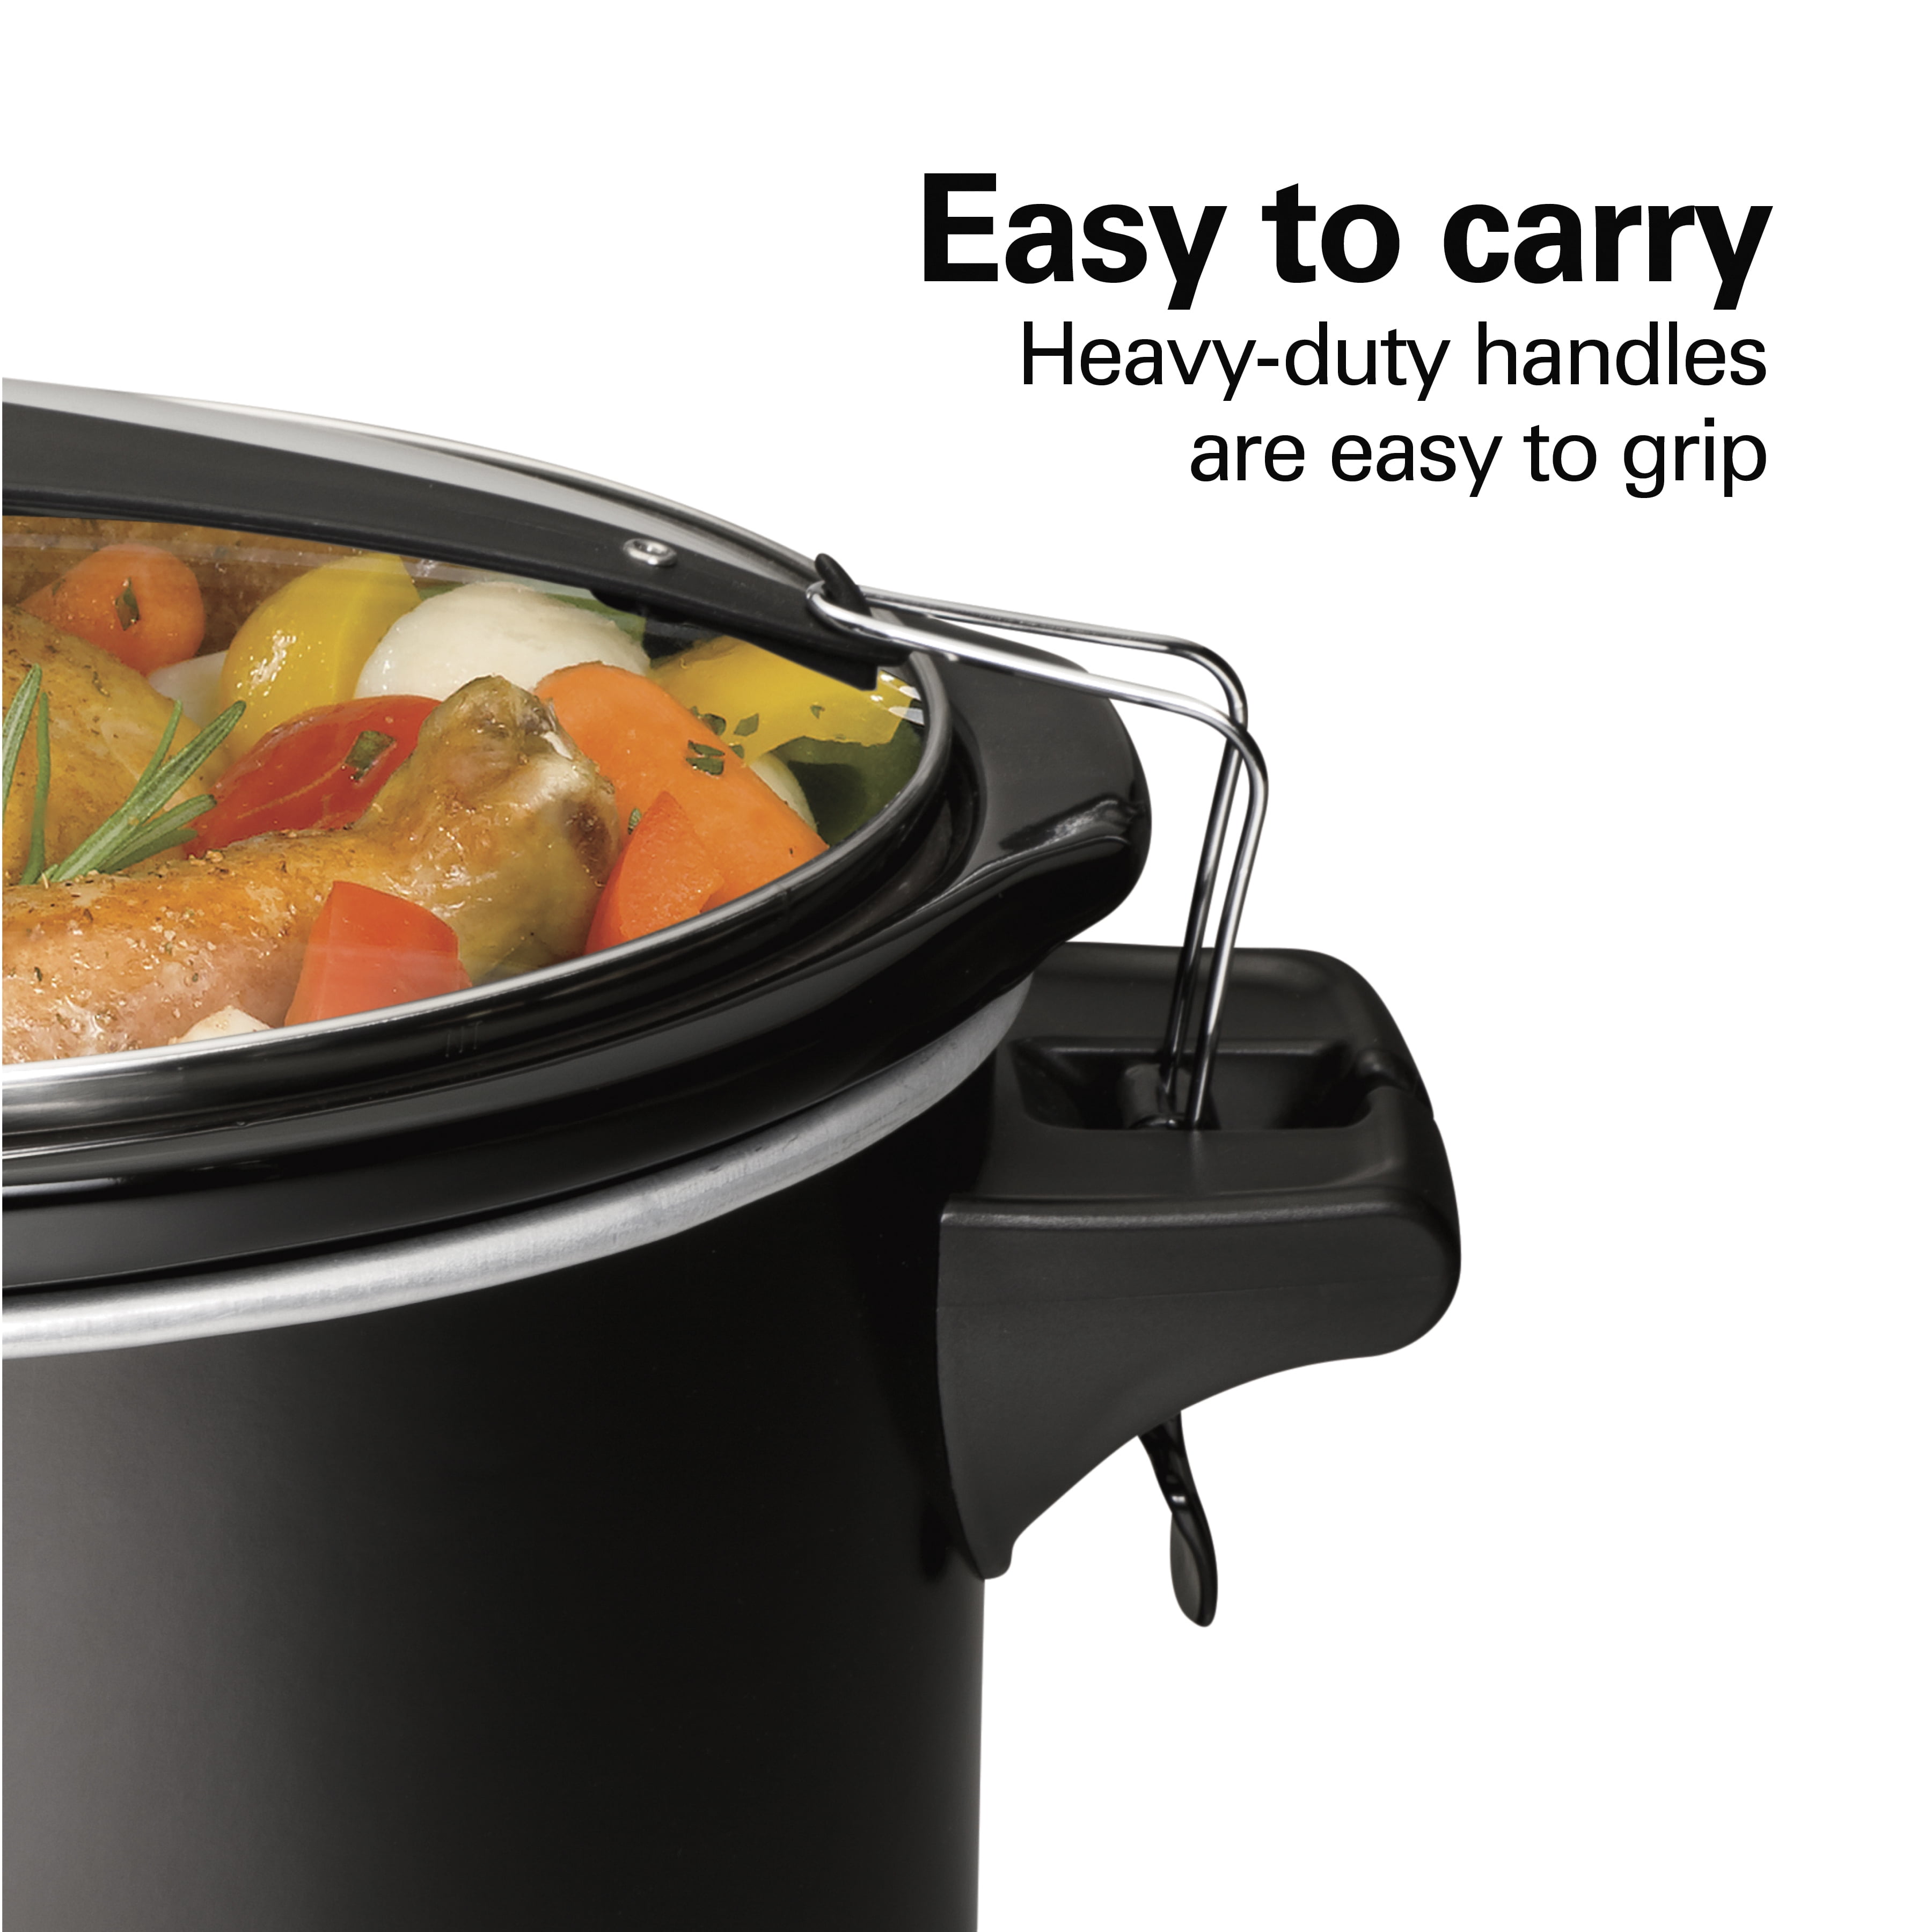  Hamilton Beach Stay or Go Portable 6-Quart Slow Cooker With Lid  Lock, Dishwasher-Safe Crock, Silver (33262): Crock Pot: Home & Kitchen